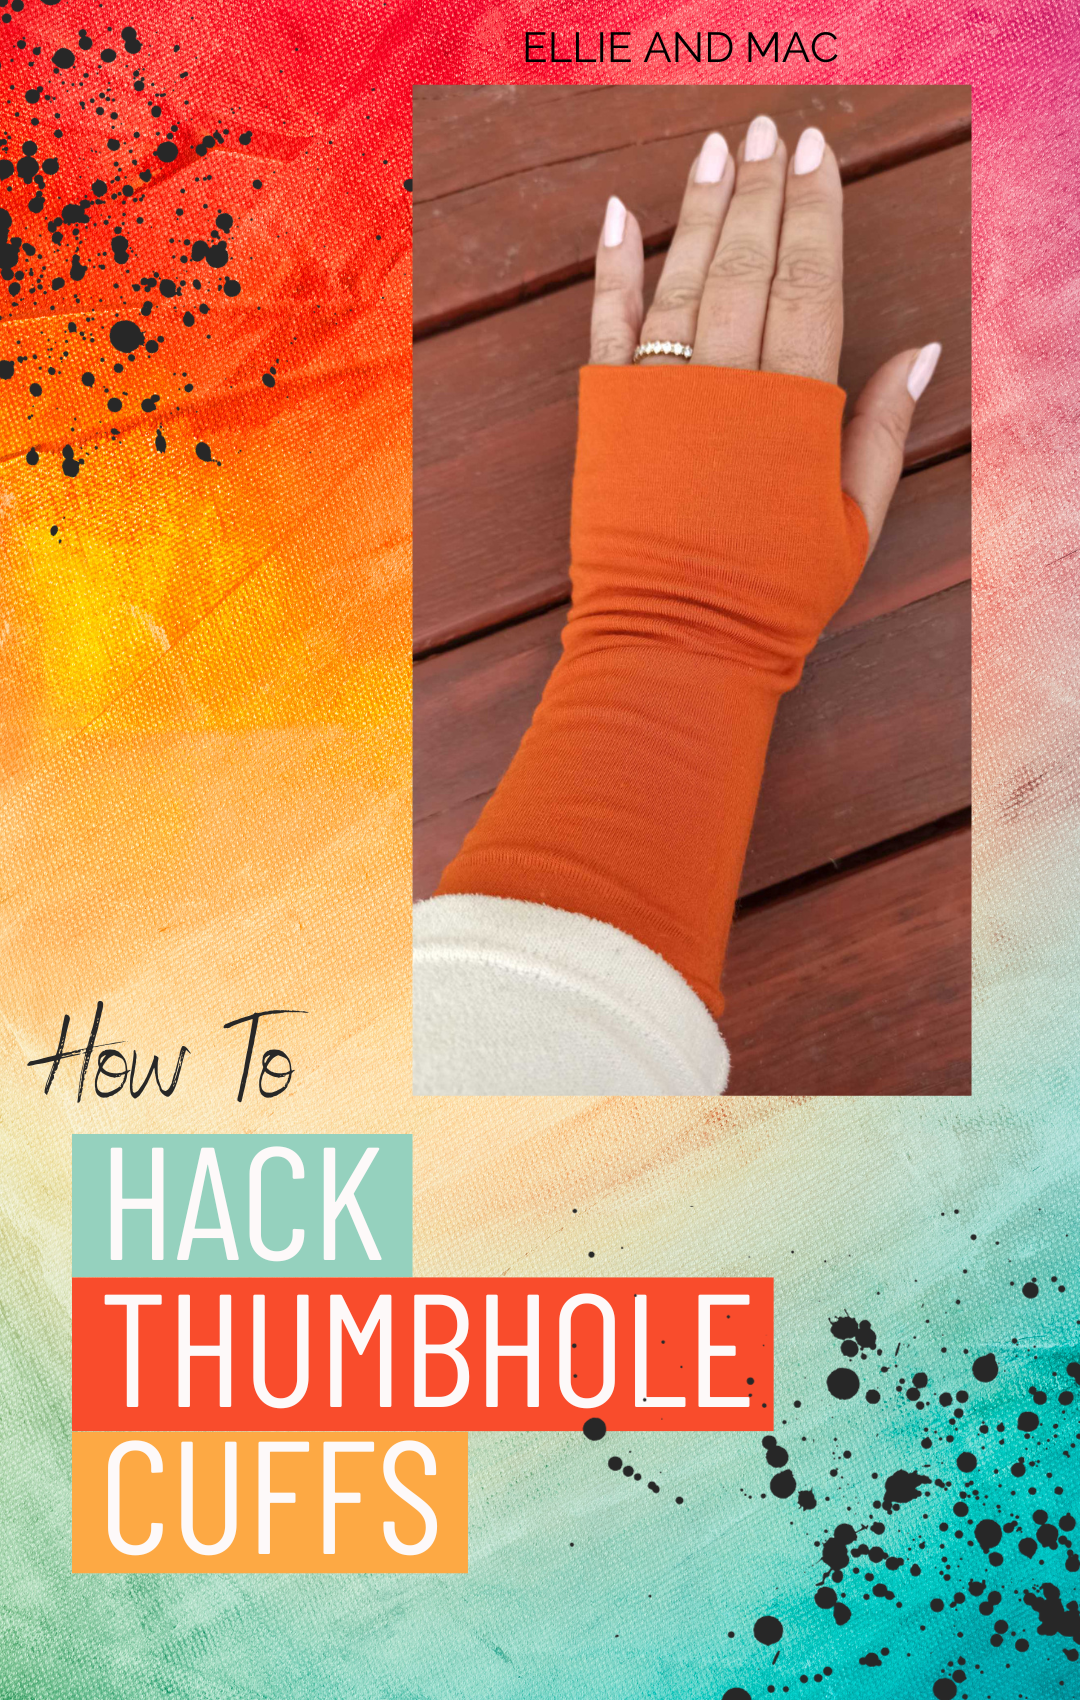 How To Hack Sleeve Cuffs Into Thumbhole Cuffs